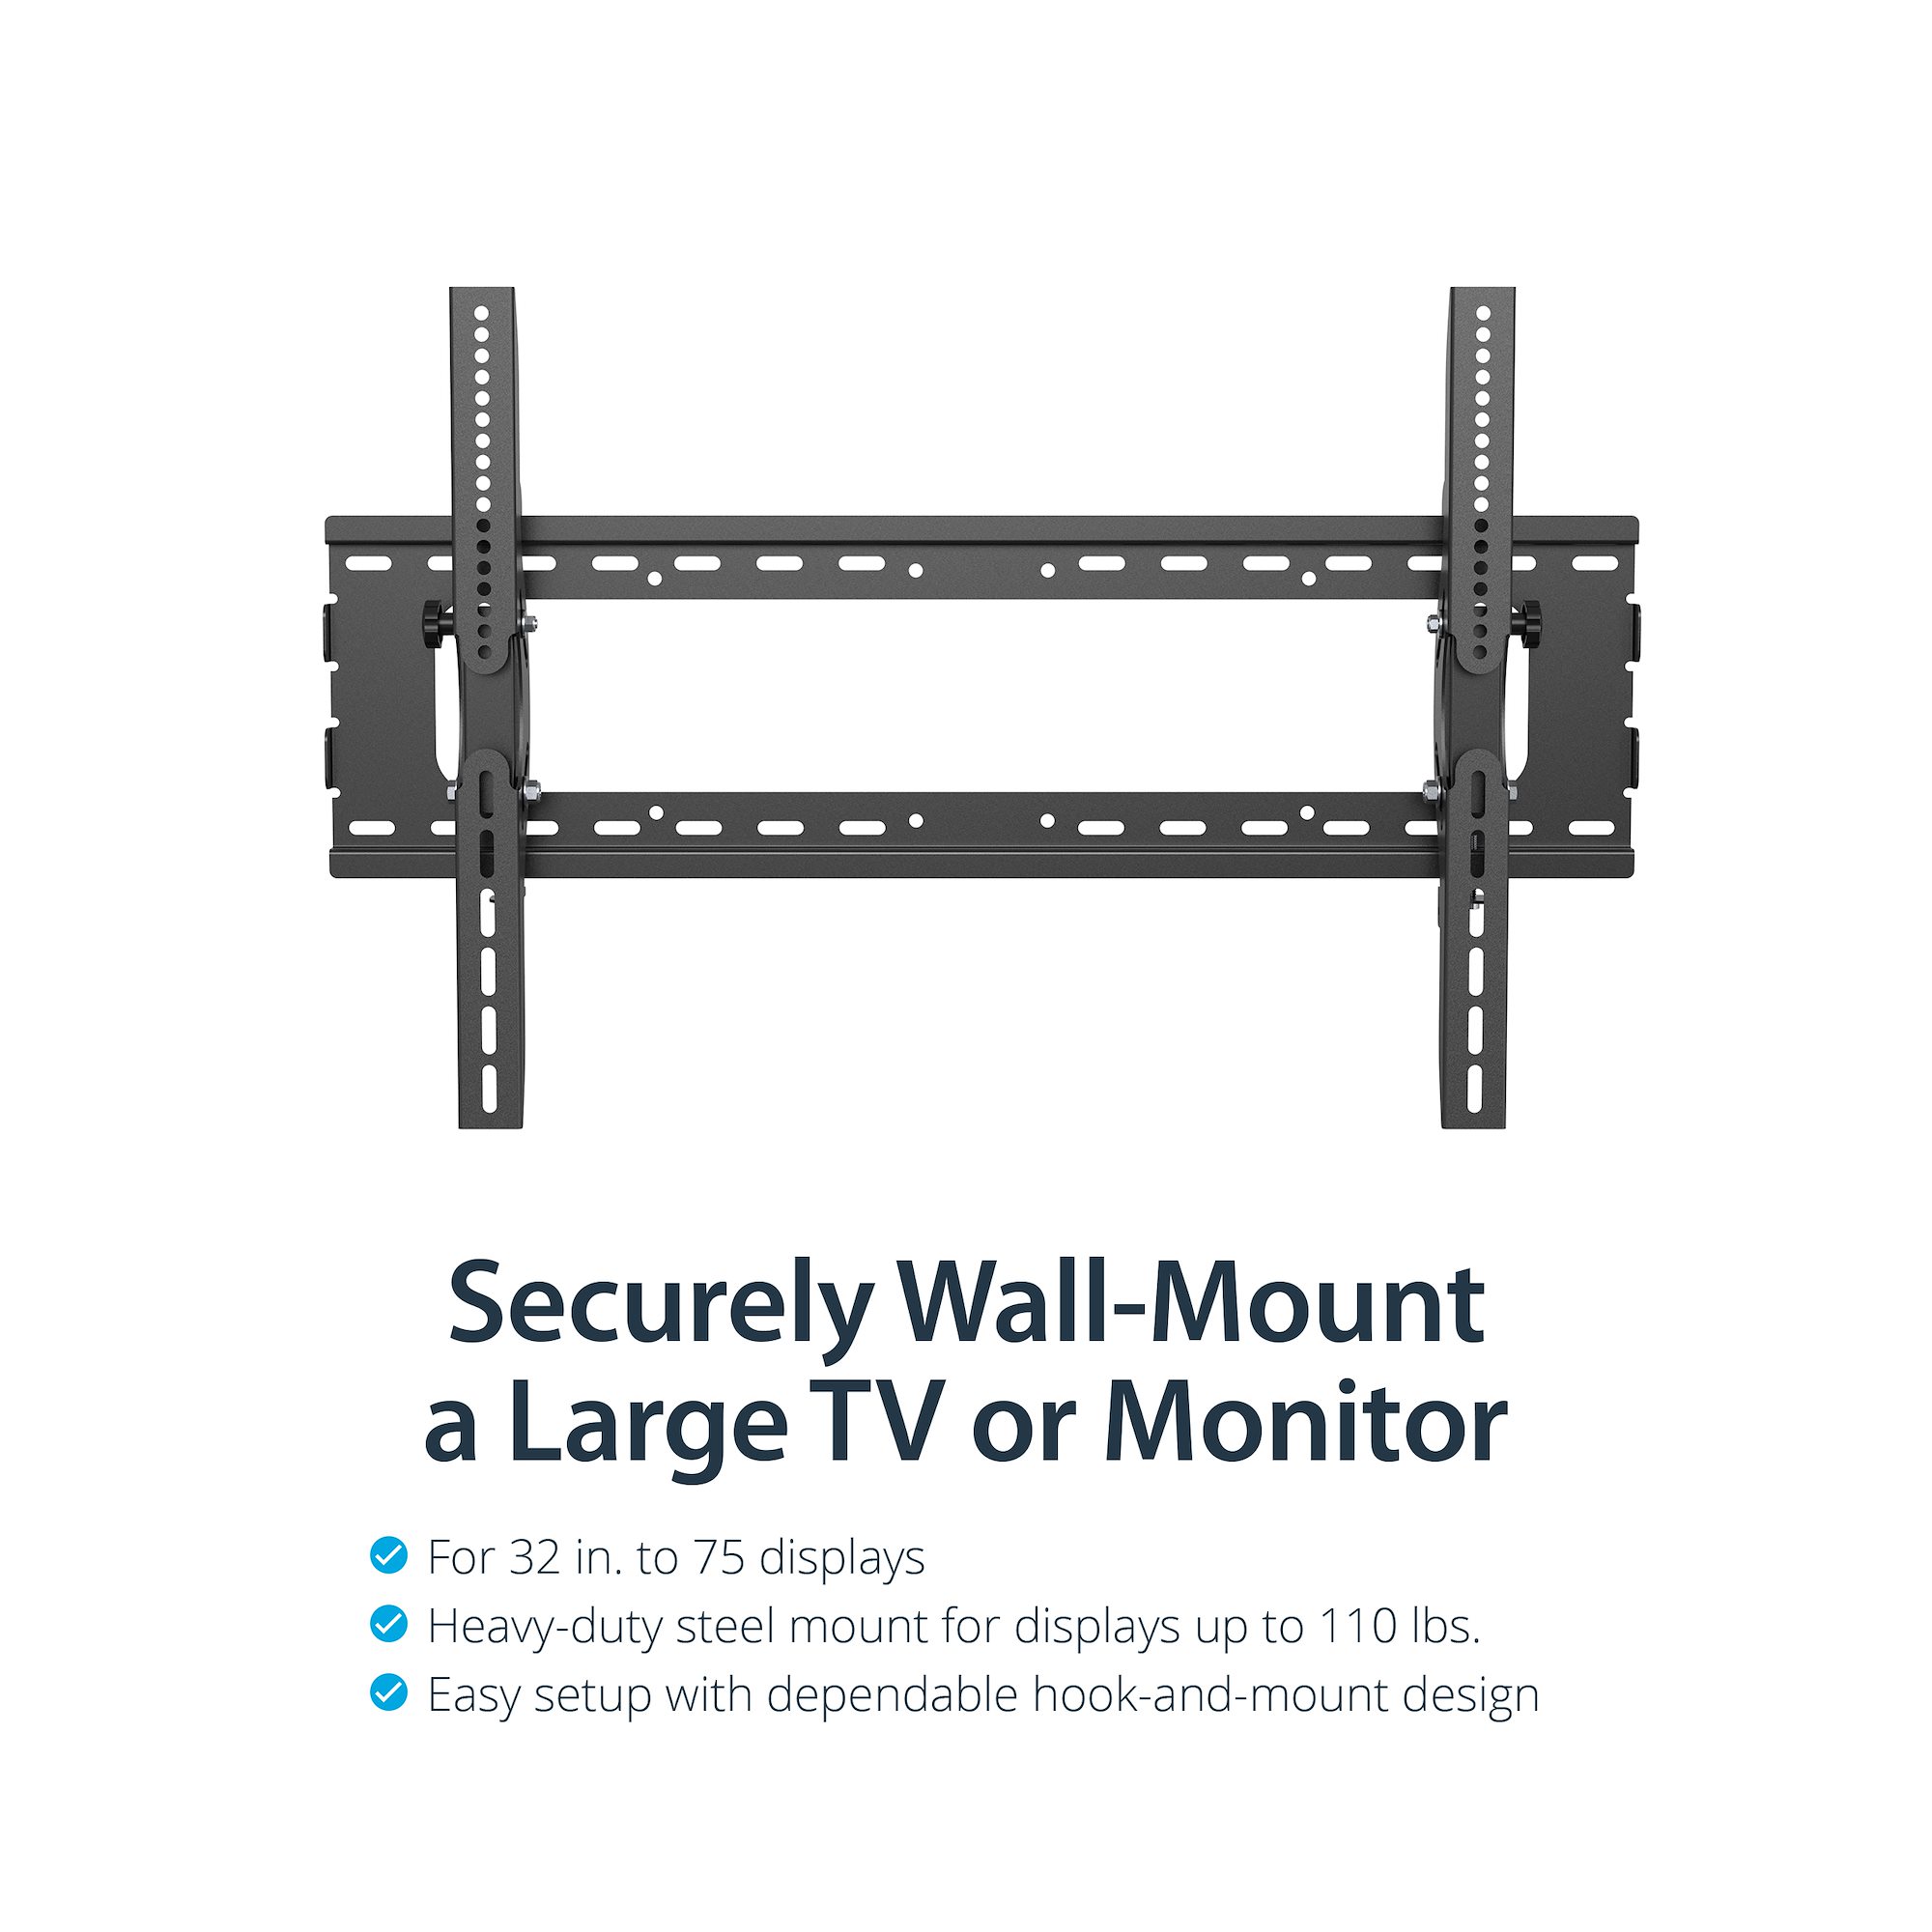  Mount-It! VESA Mount Adapter Kit, TV Wall Mount Bracket  Adapter Converts 200x200 mm Patterns to 300x300 and 400x400 mm, Fits Most  32 Inch to 55 Inch TVs